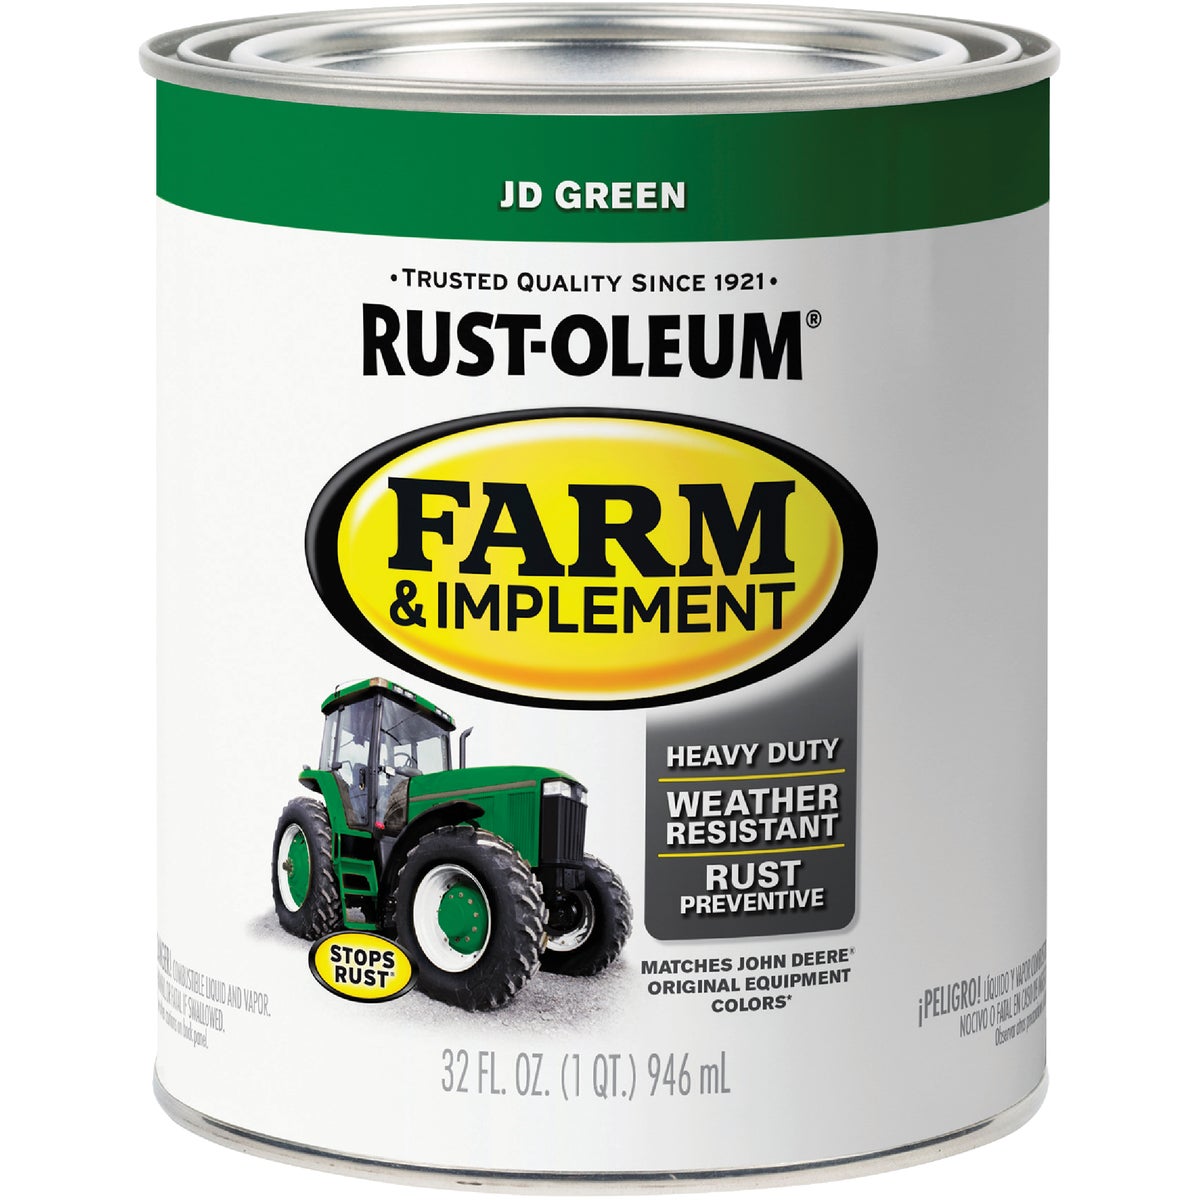 Item 771276, Durable, rust preventive enamel with Stops Rust formula offers excellent 